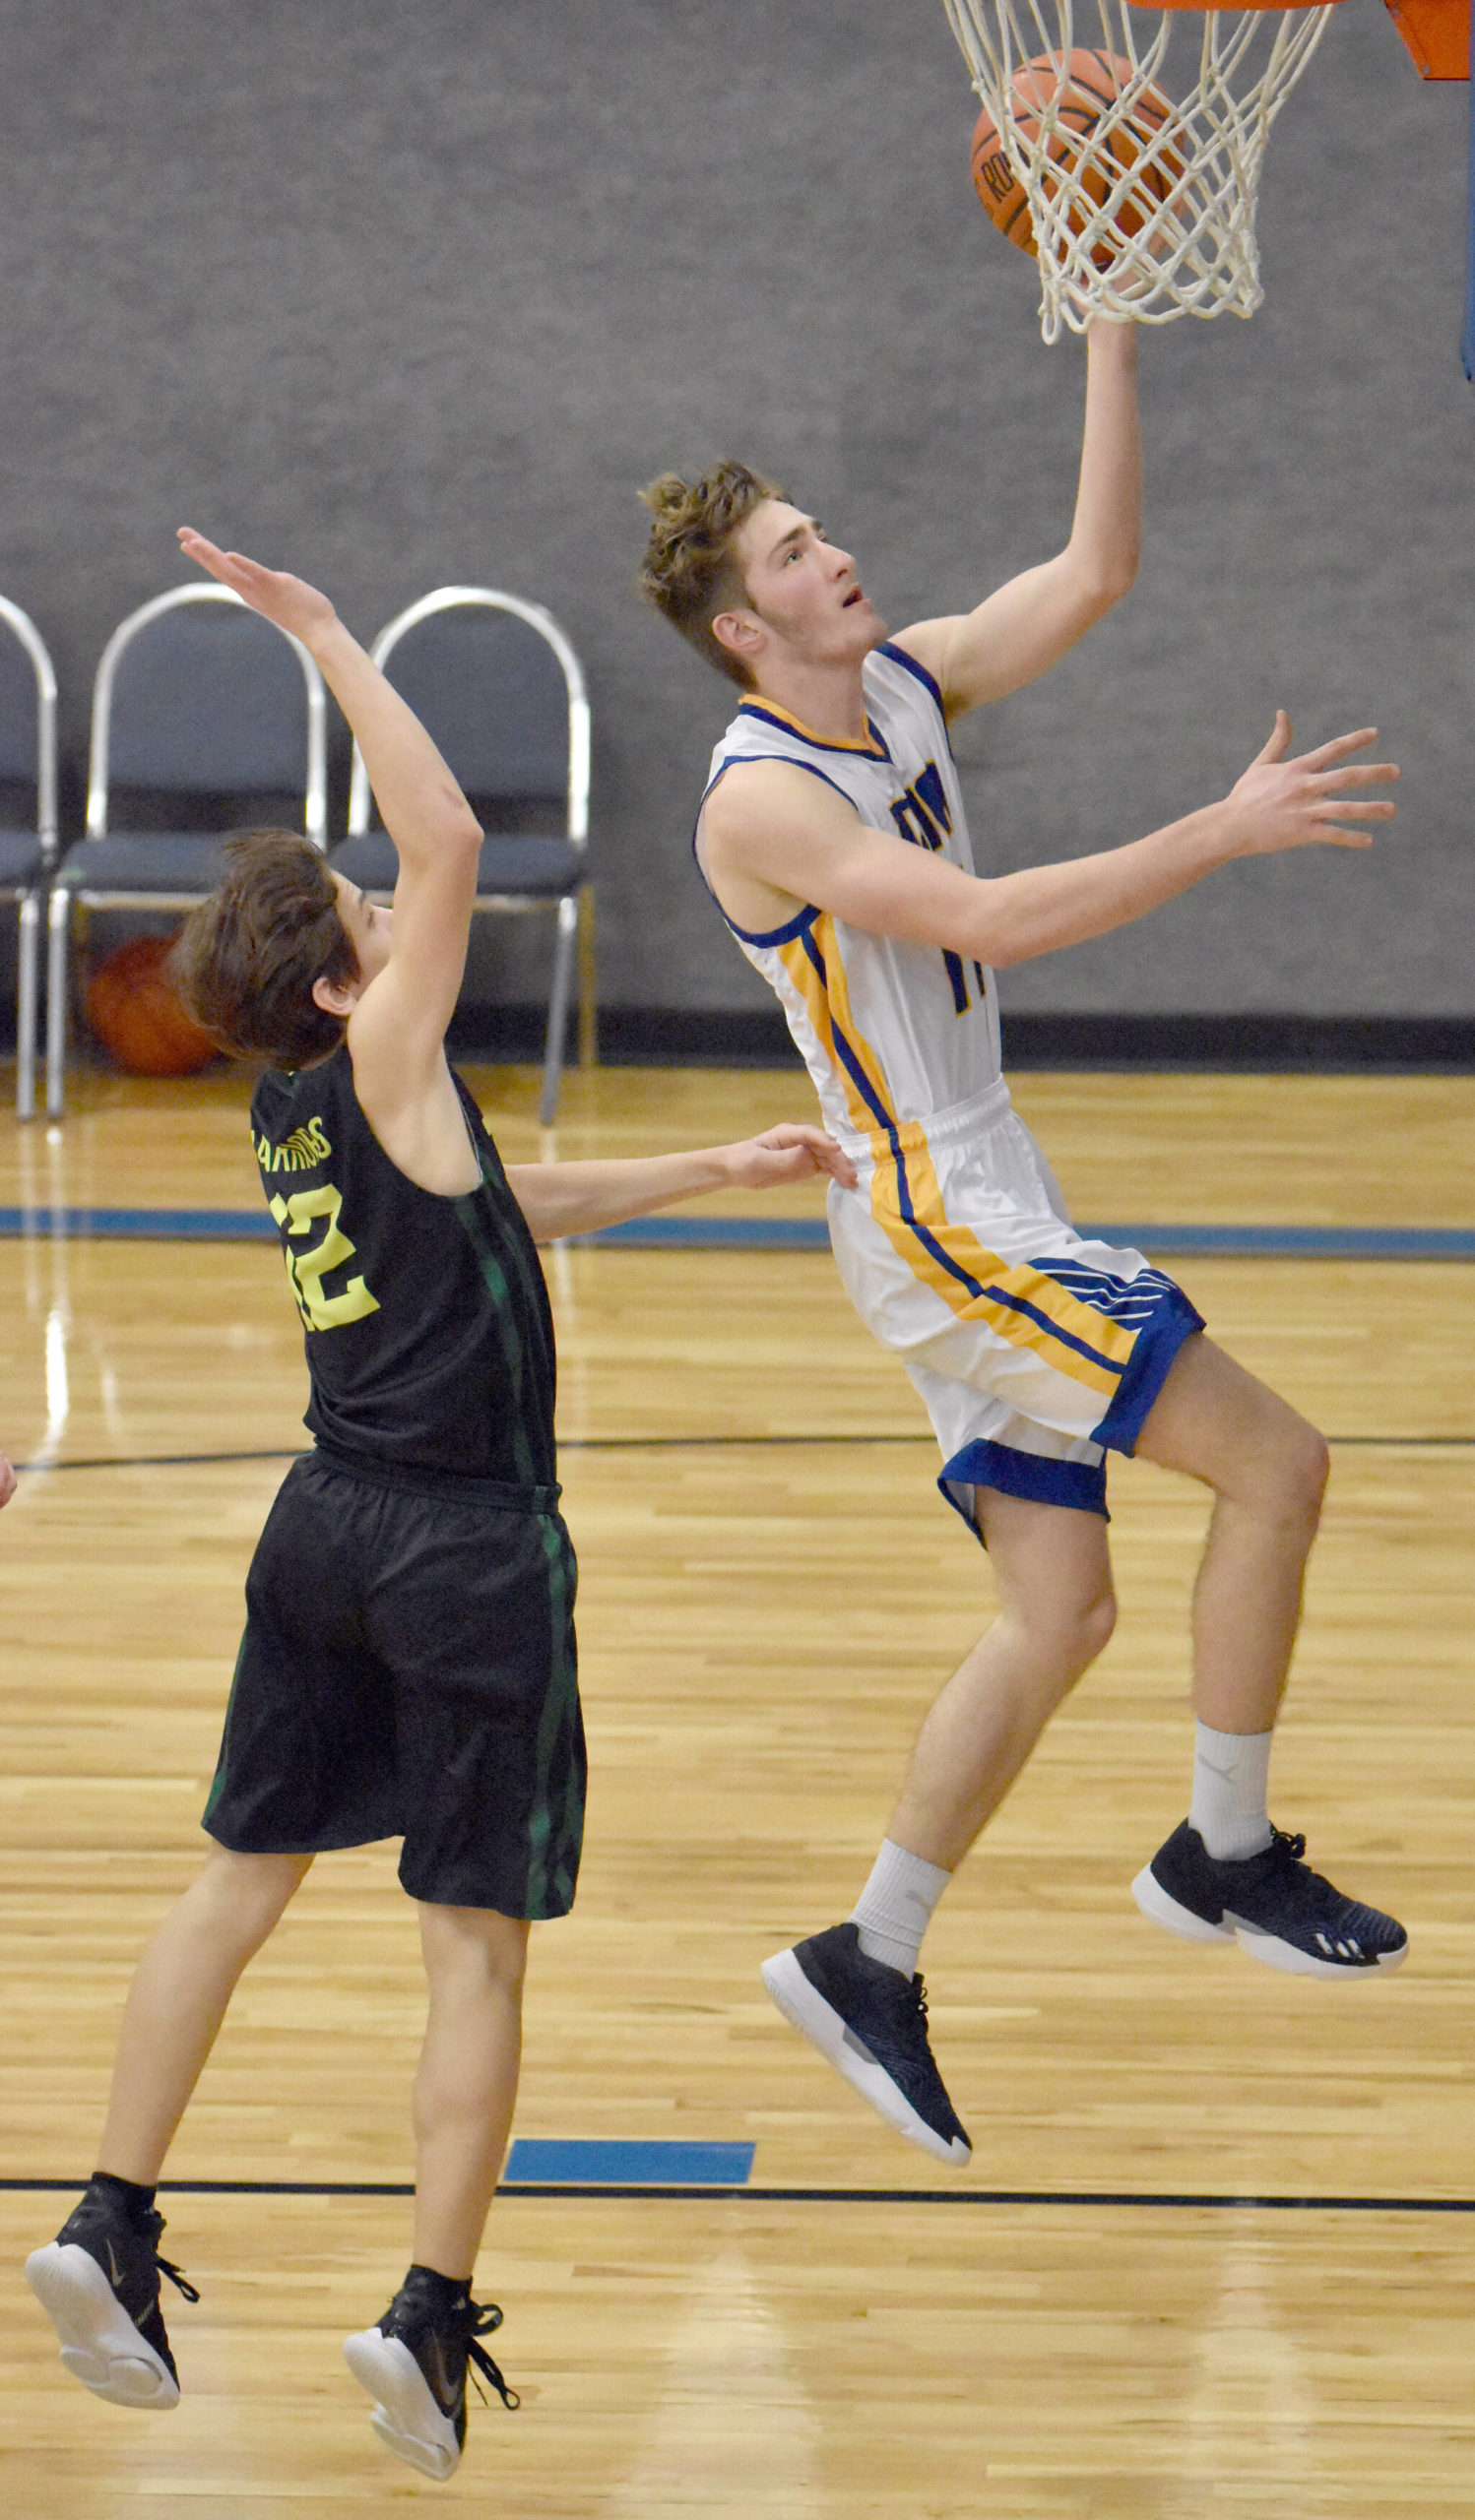 Cook Inlet Academy’s Abraham Henderson drives to the basket against Birchwood Christian on Saturday, Jan. 21, 2023, at Cook Inlet Academy near Soldotna, Alaska. (Photo by Jeff Helminiak/Peninsula Clarion)